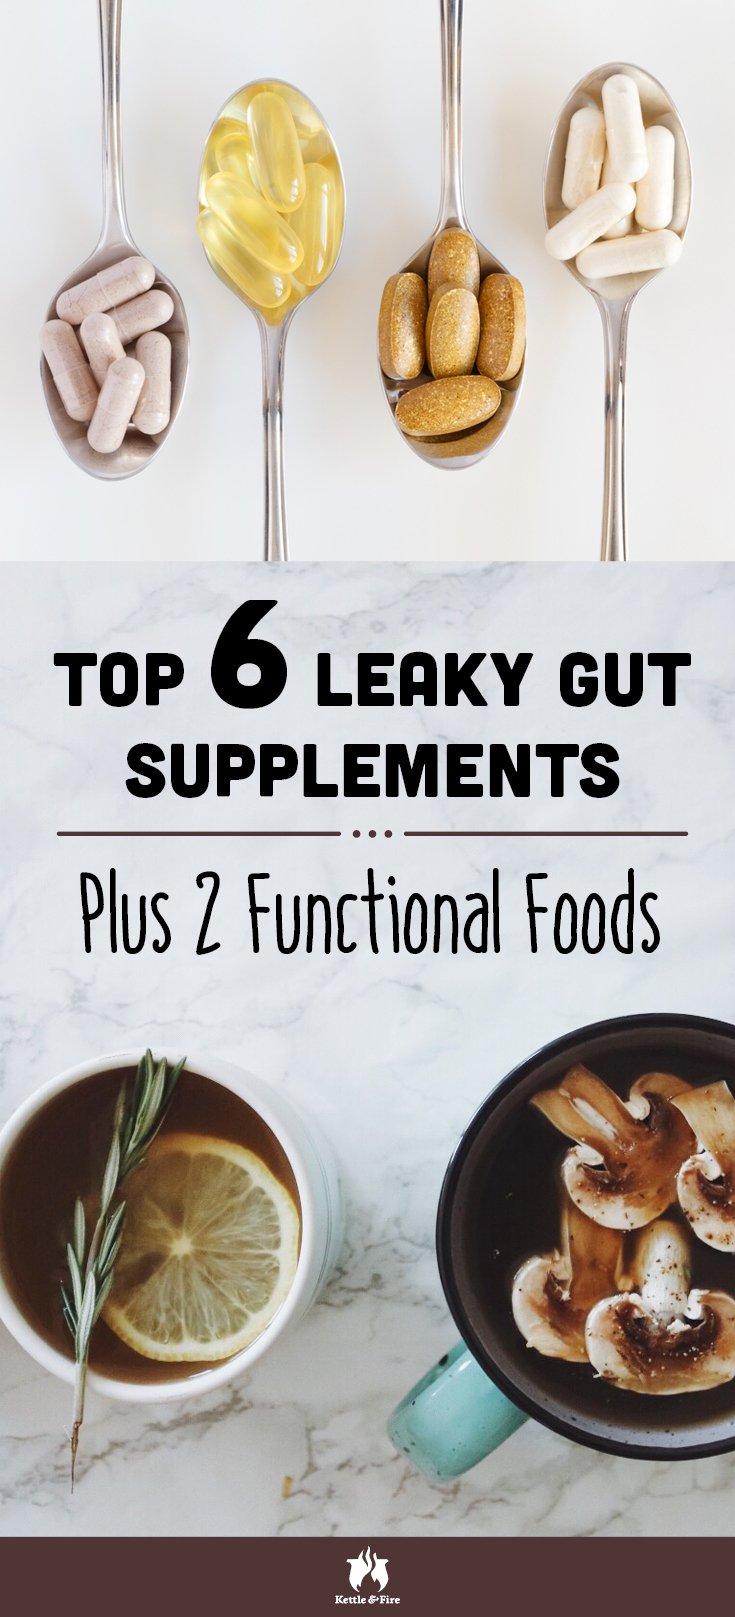 Top 6 leaky gut supplements to take for reducing intestinal inflammation, strengthening the gut lining, regaining your overall health.